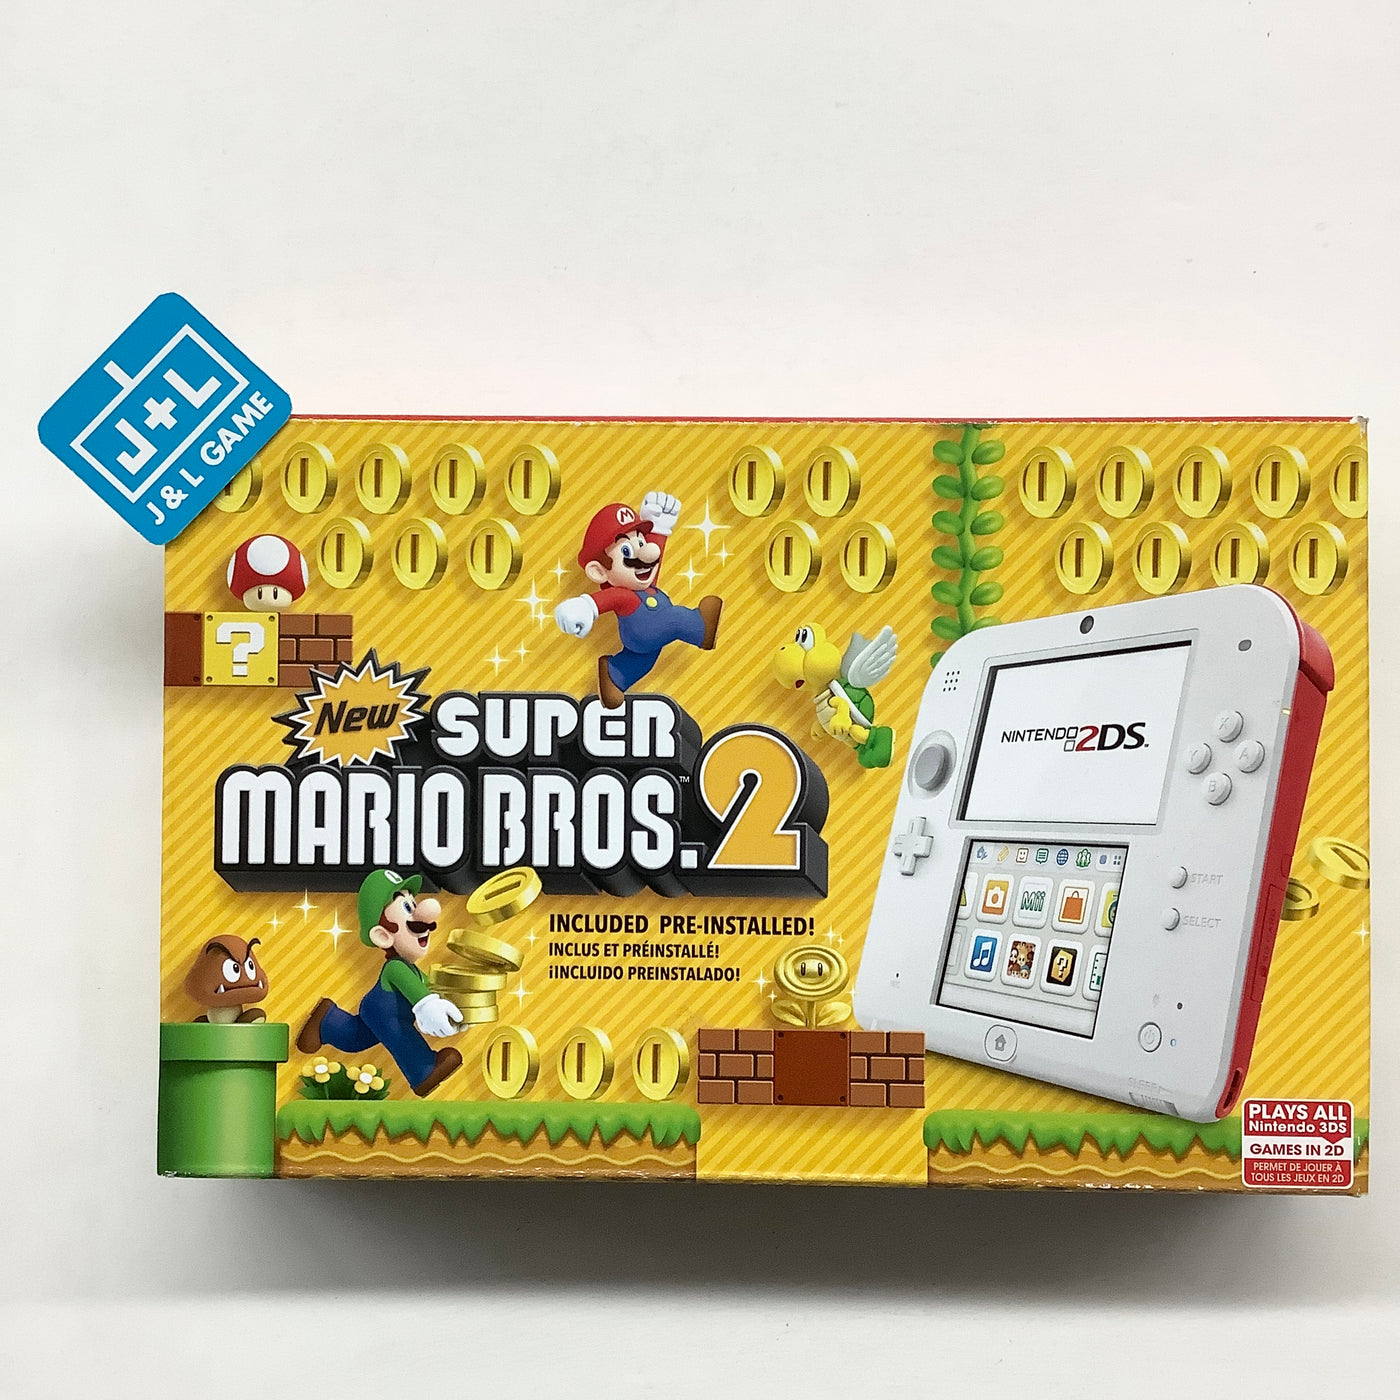 Red) J&L 2 New Nintendo Bros. Console 2DS (Scarlet Super | (Game Game with Mario